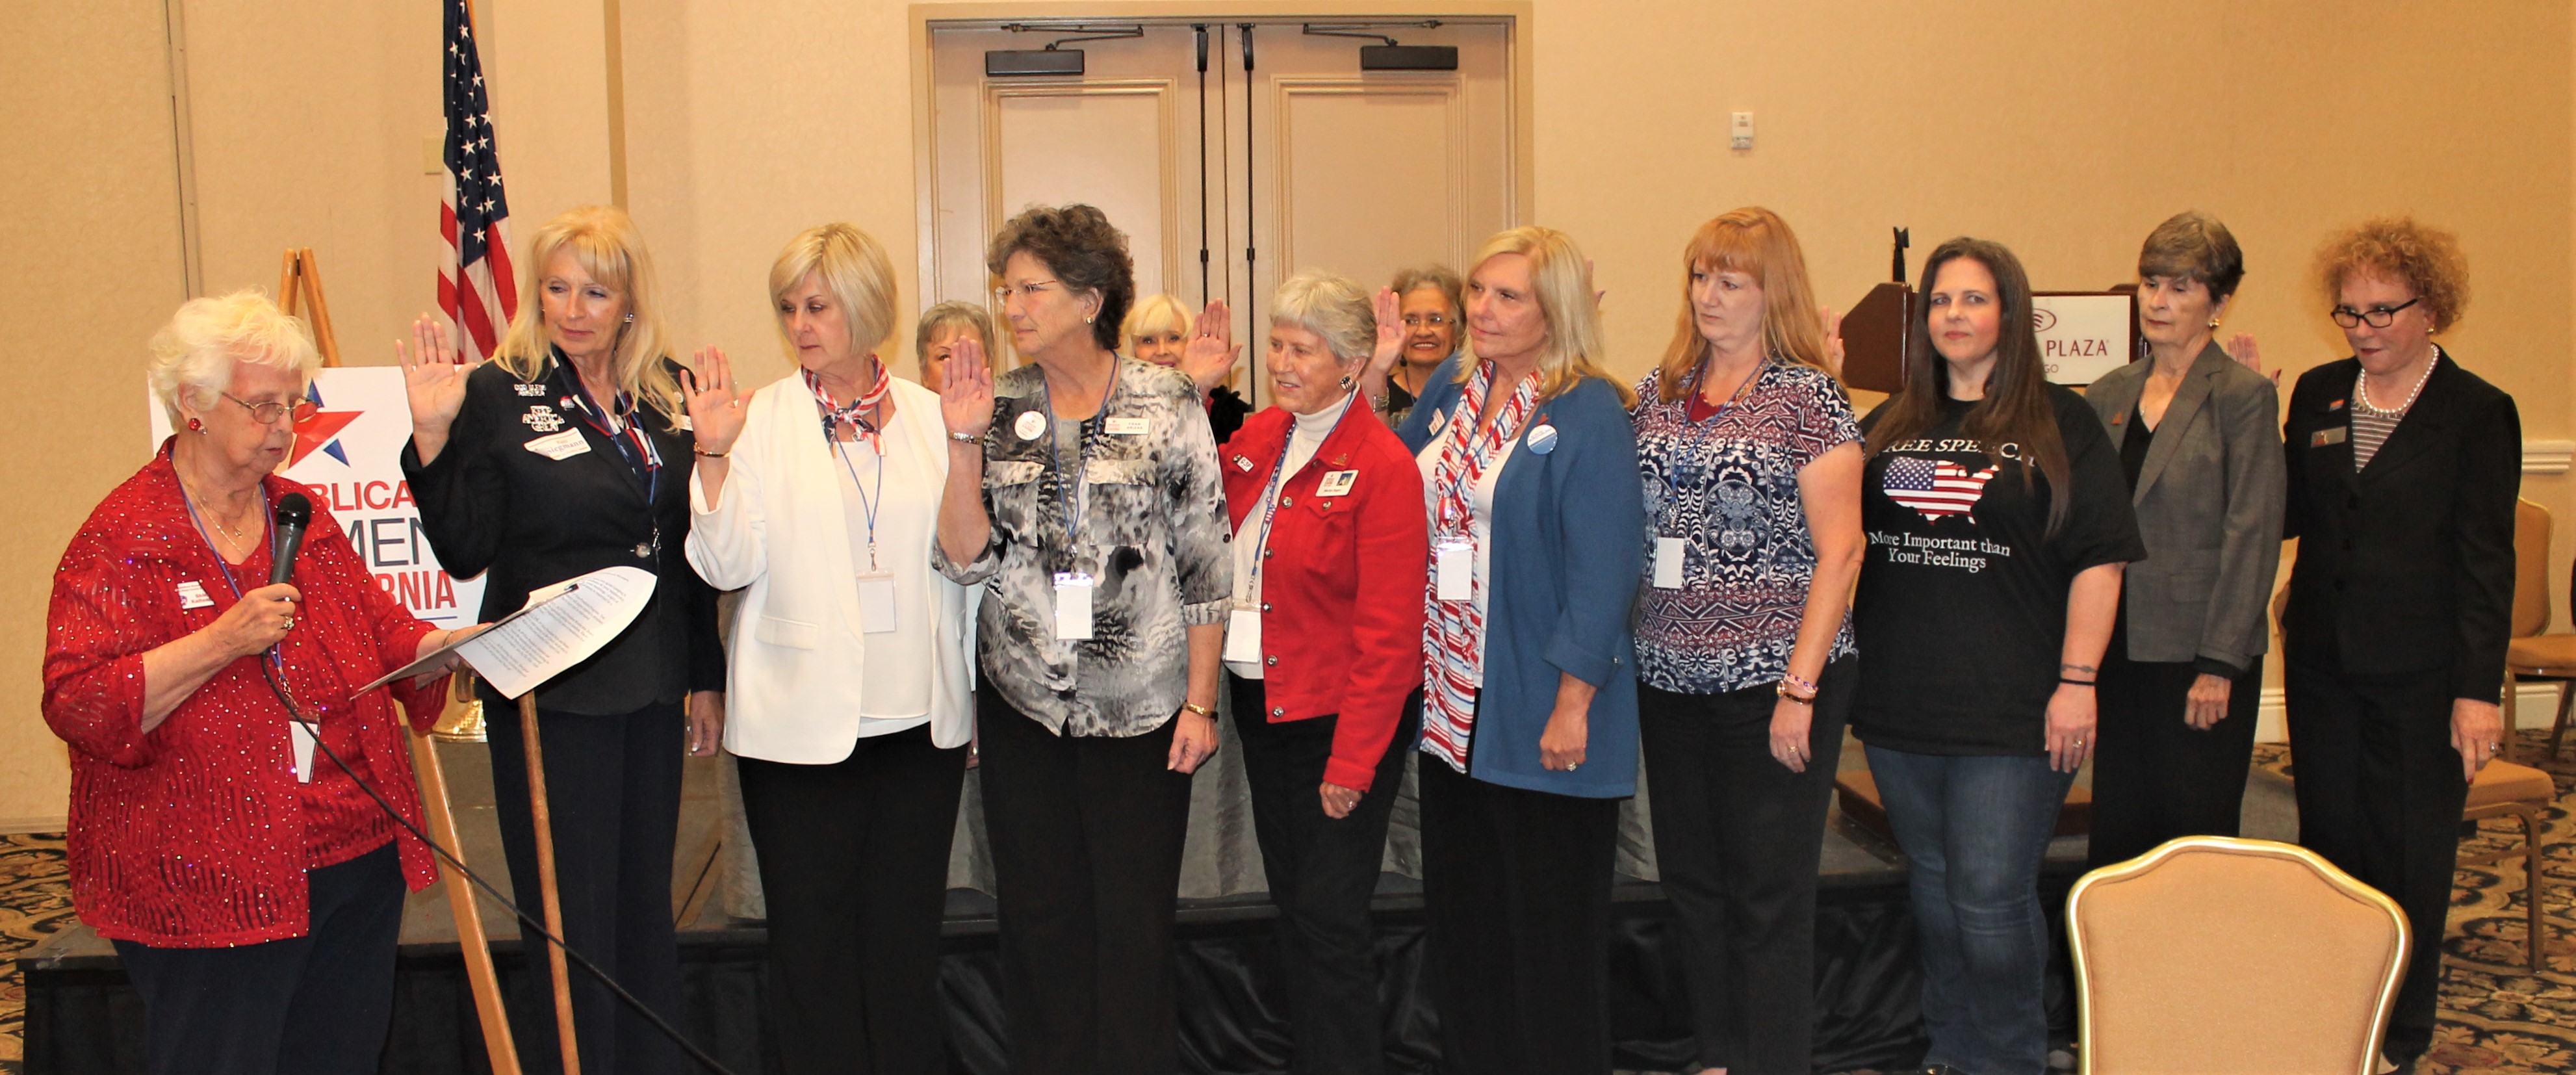 RWCSDC First Biennial Convention - Elected Officer Installation